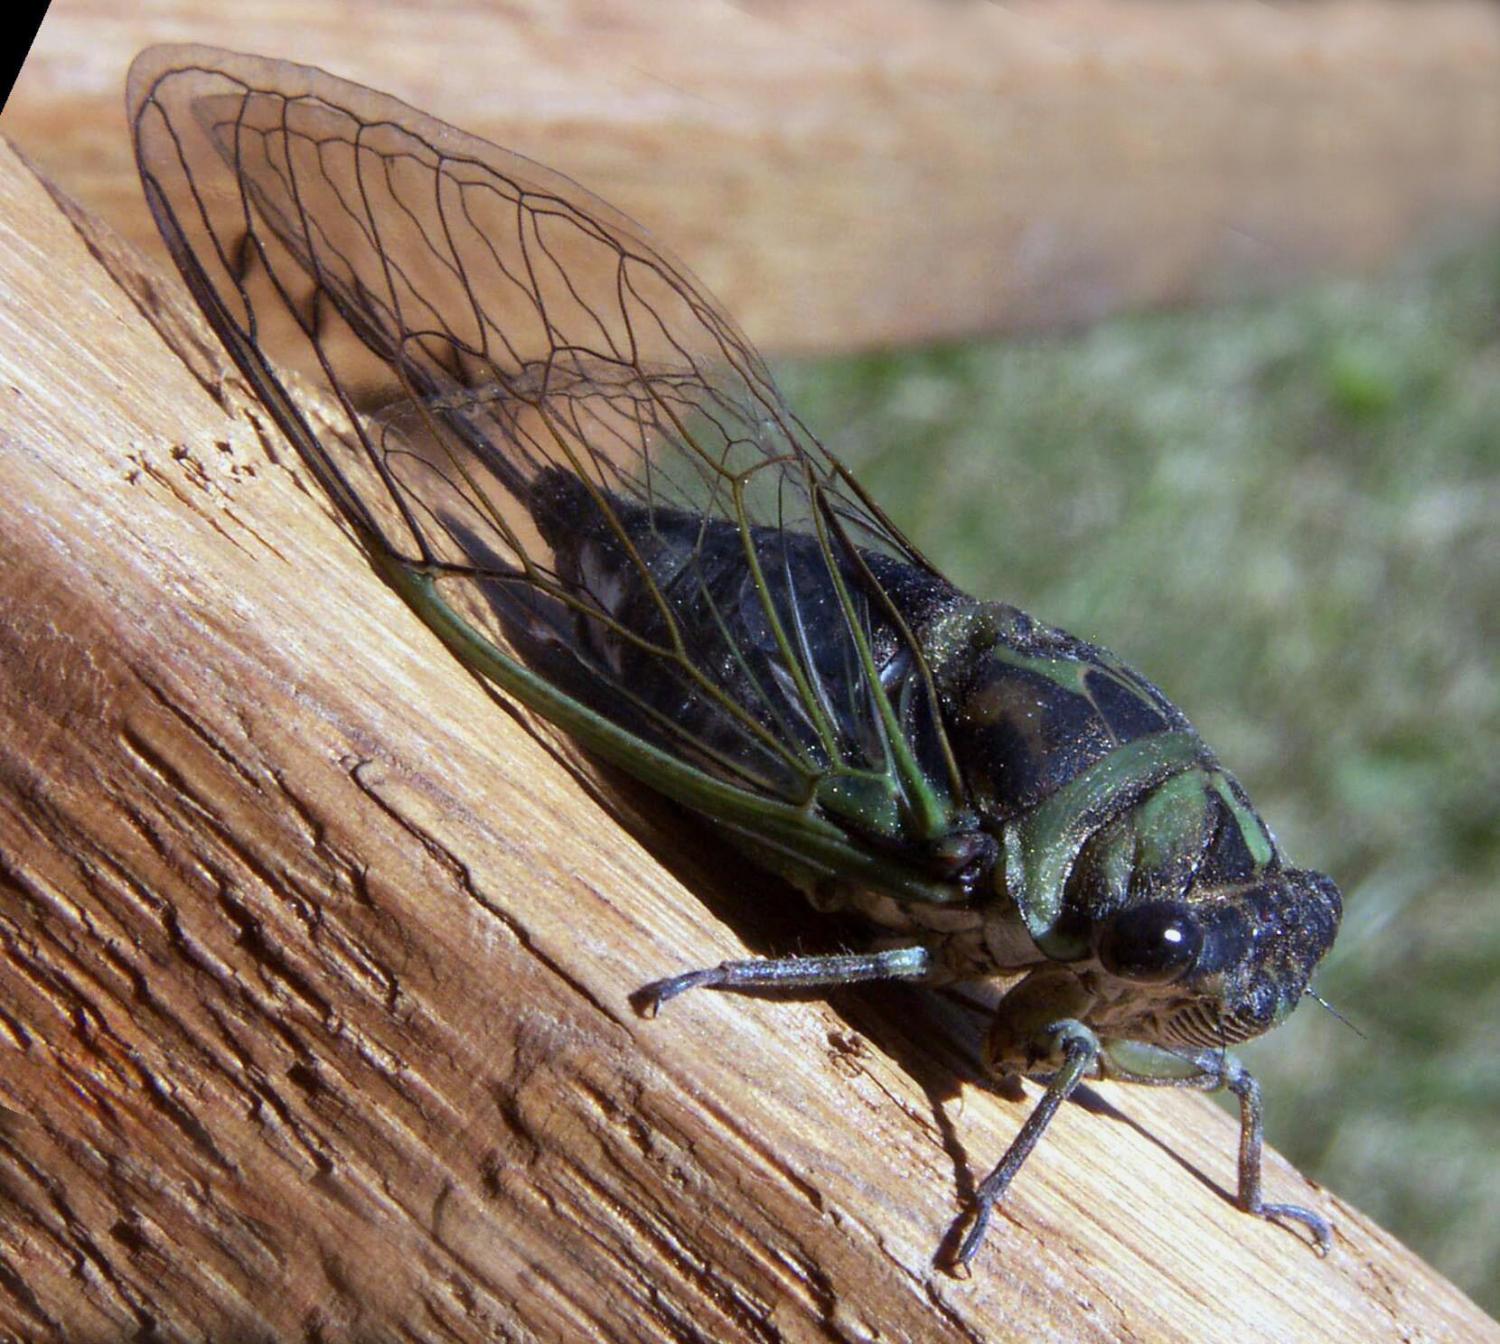 A rare blue-eyed cicada was found in Niles, Illinois: Thousands more could exist, professor says